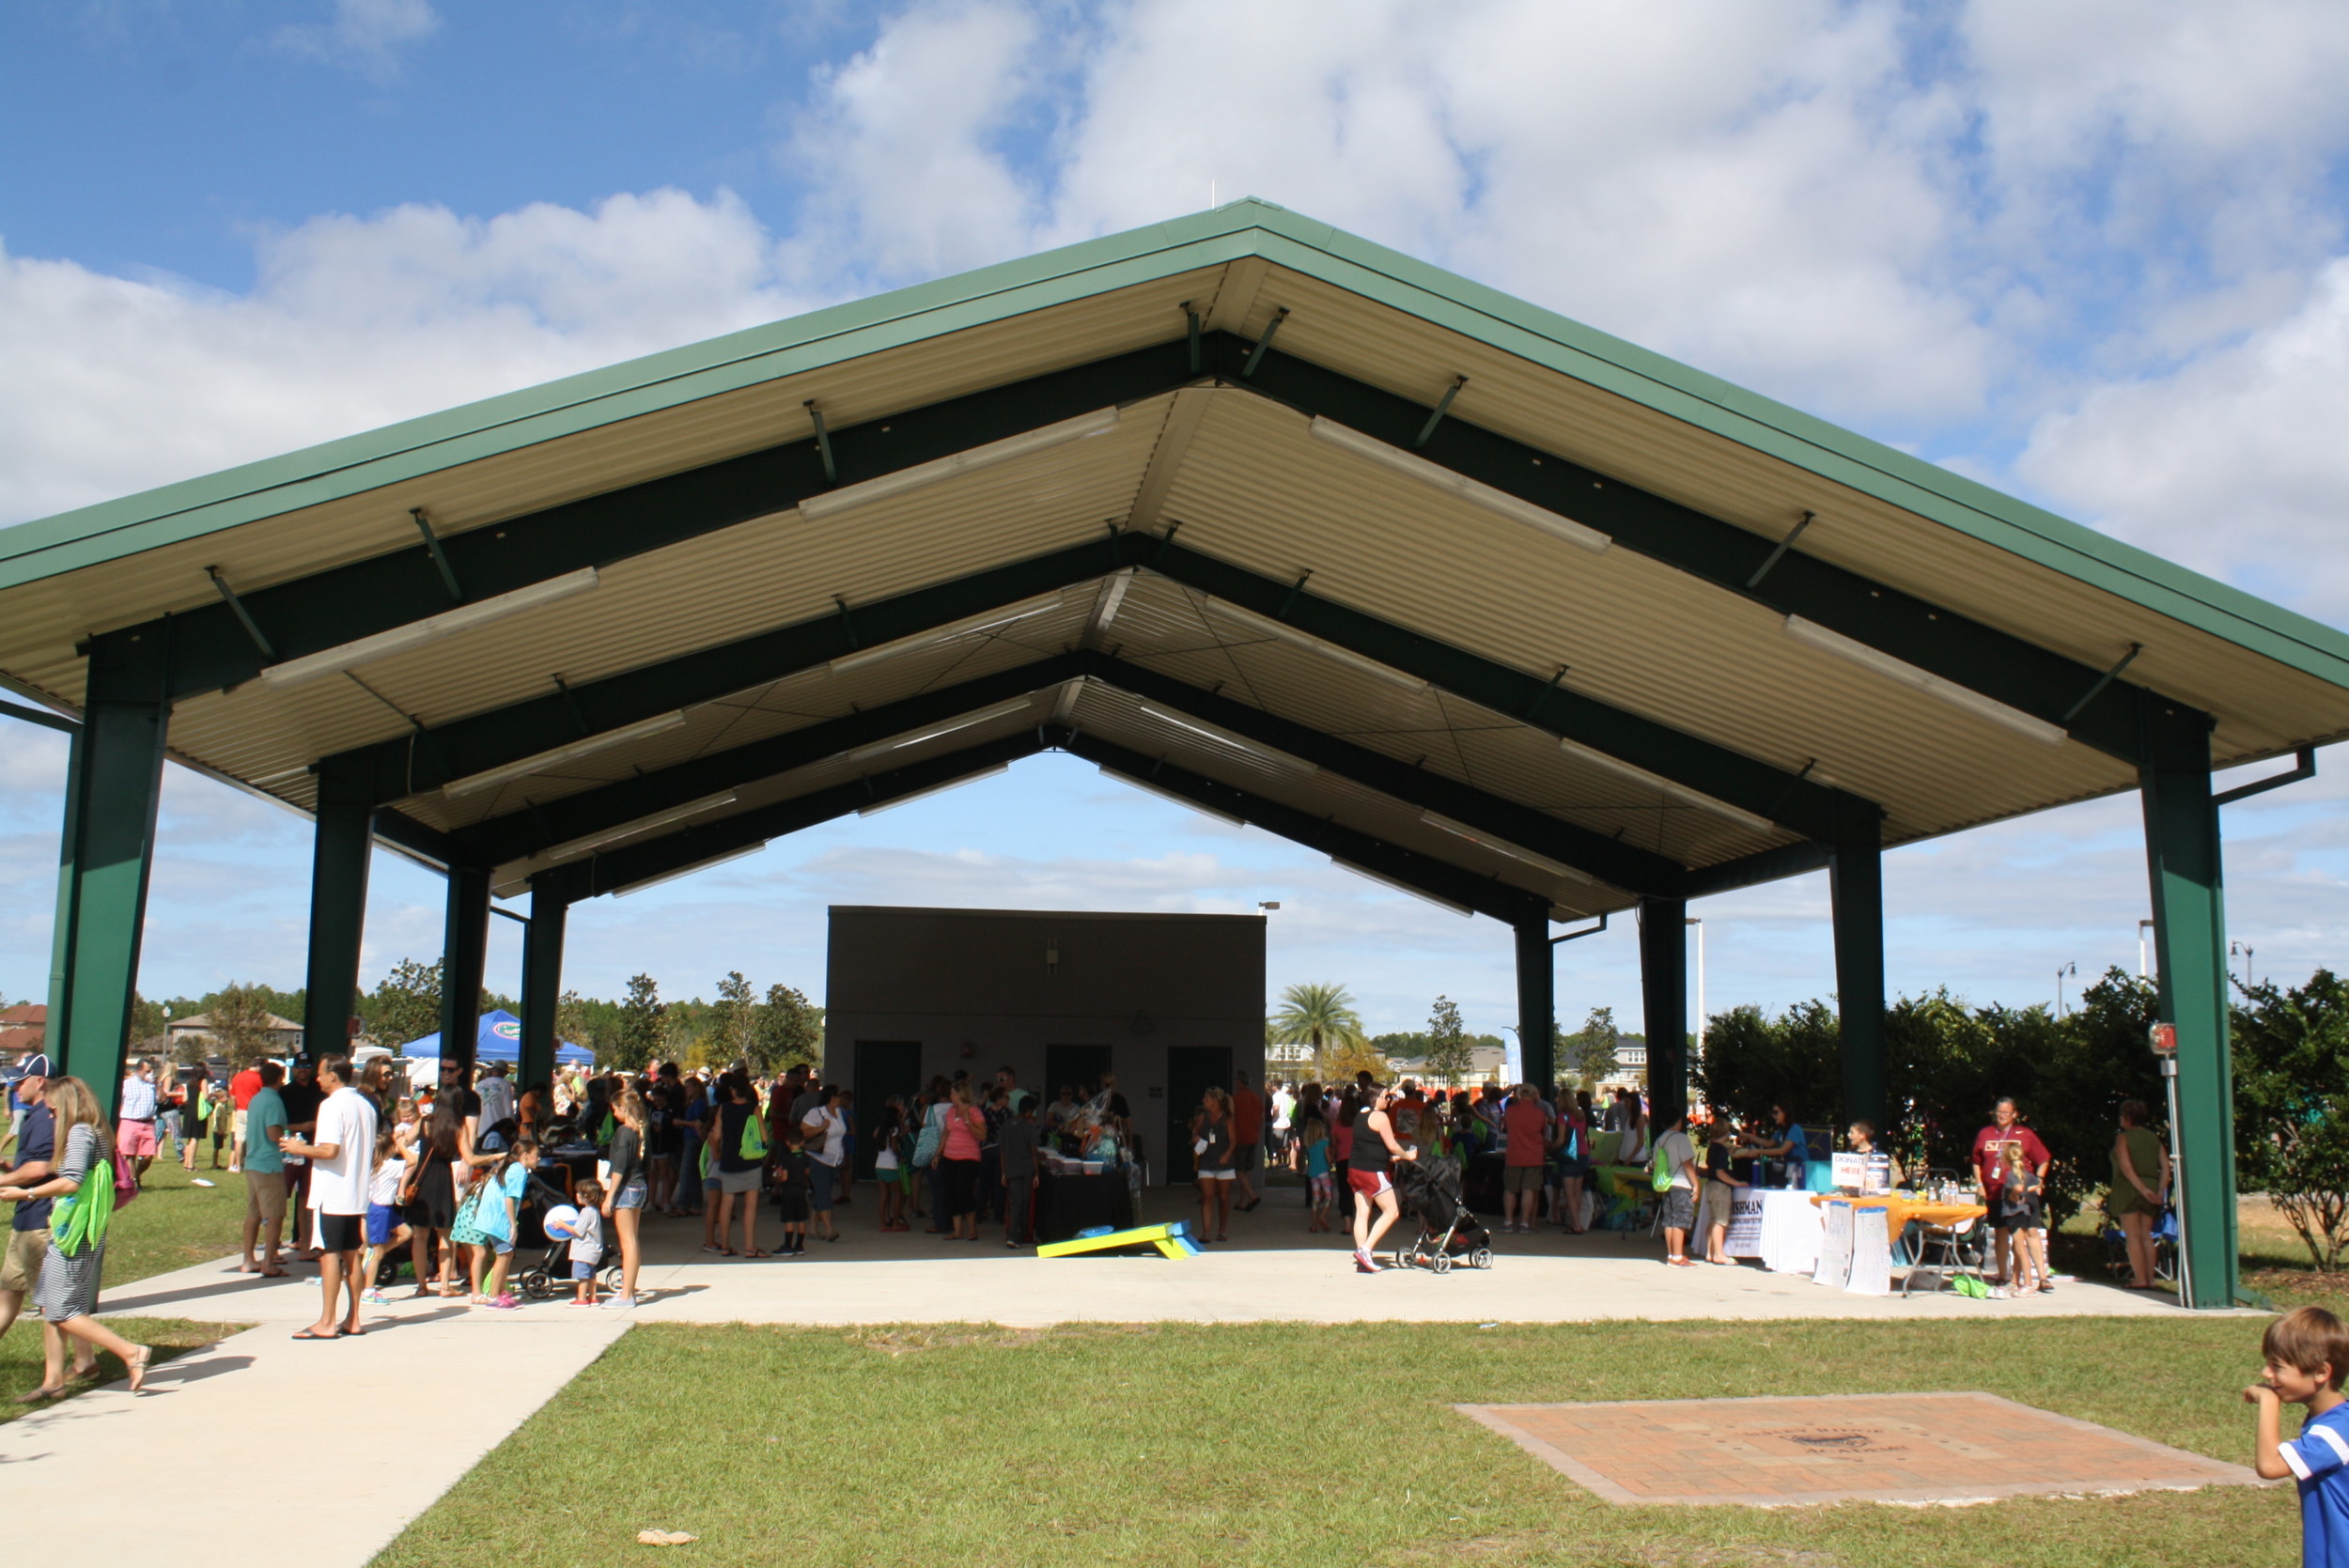 Families could get cool as they browsed gift baskets in the shade of the campus' large outdoor pavilion.